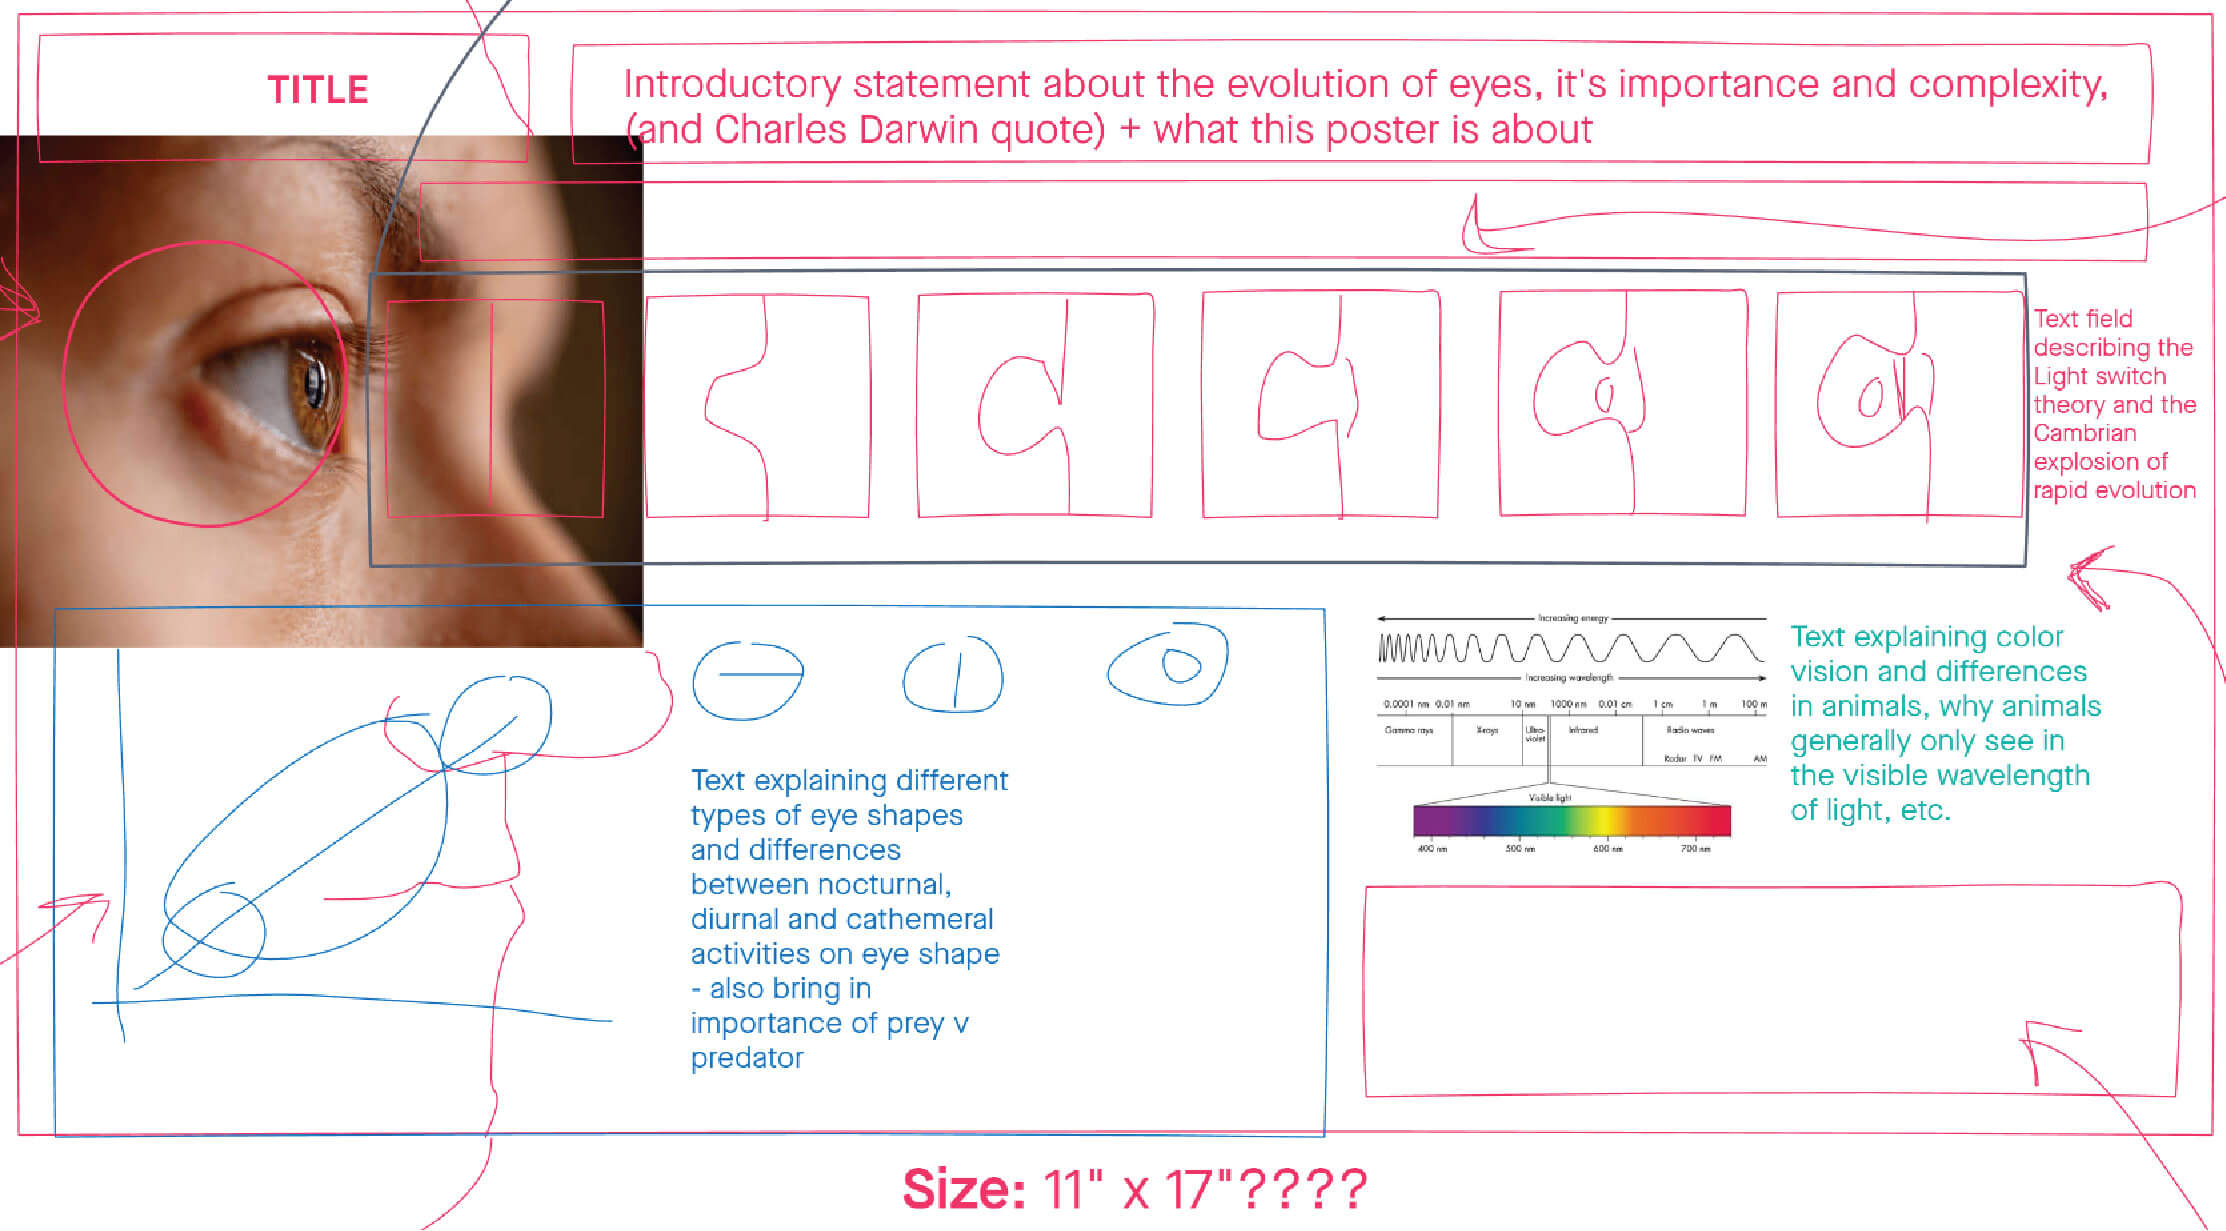 Initial Rough Layout for the infographic on the Evolution of Eyes